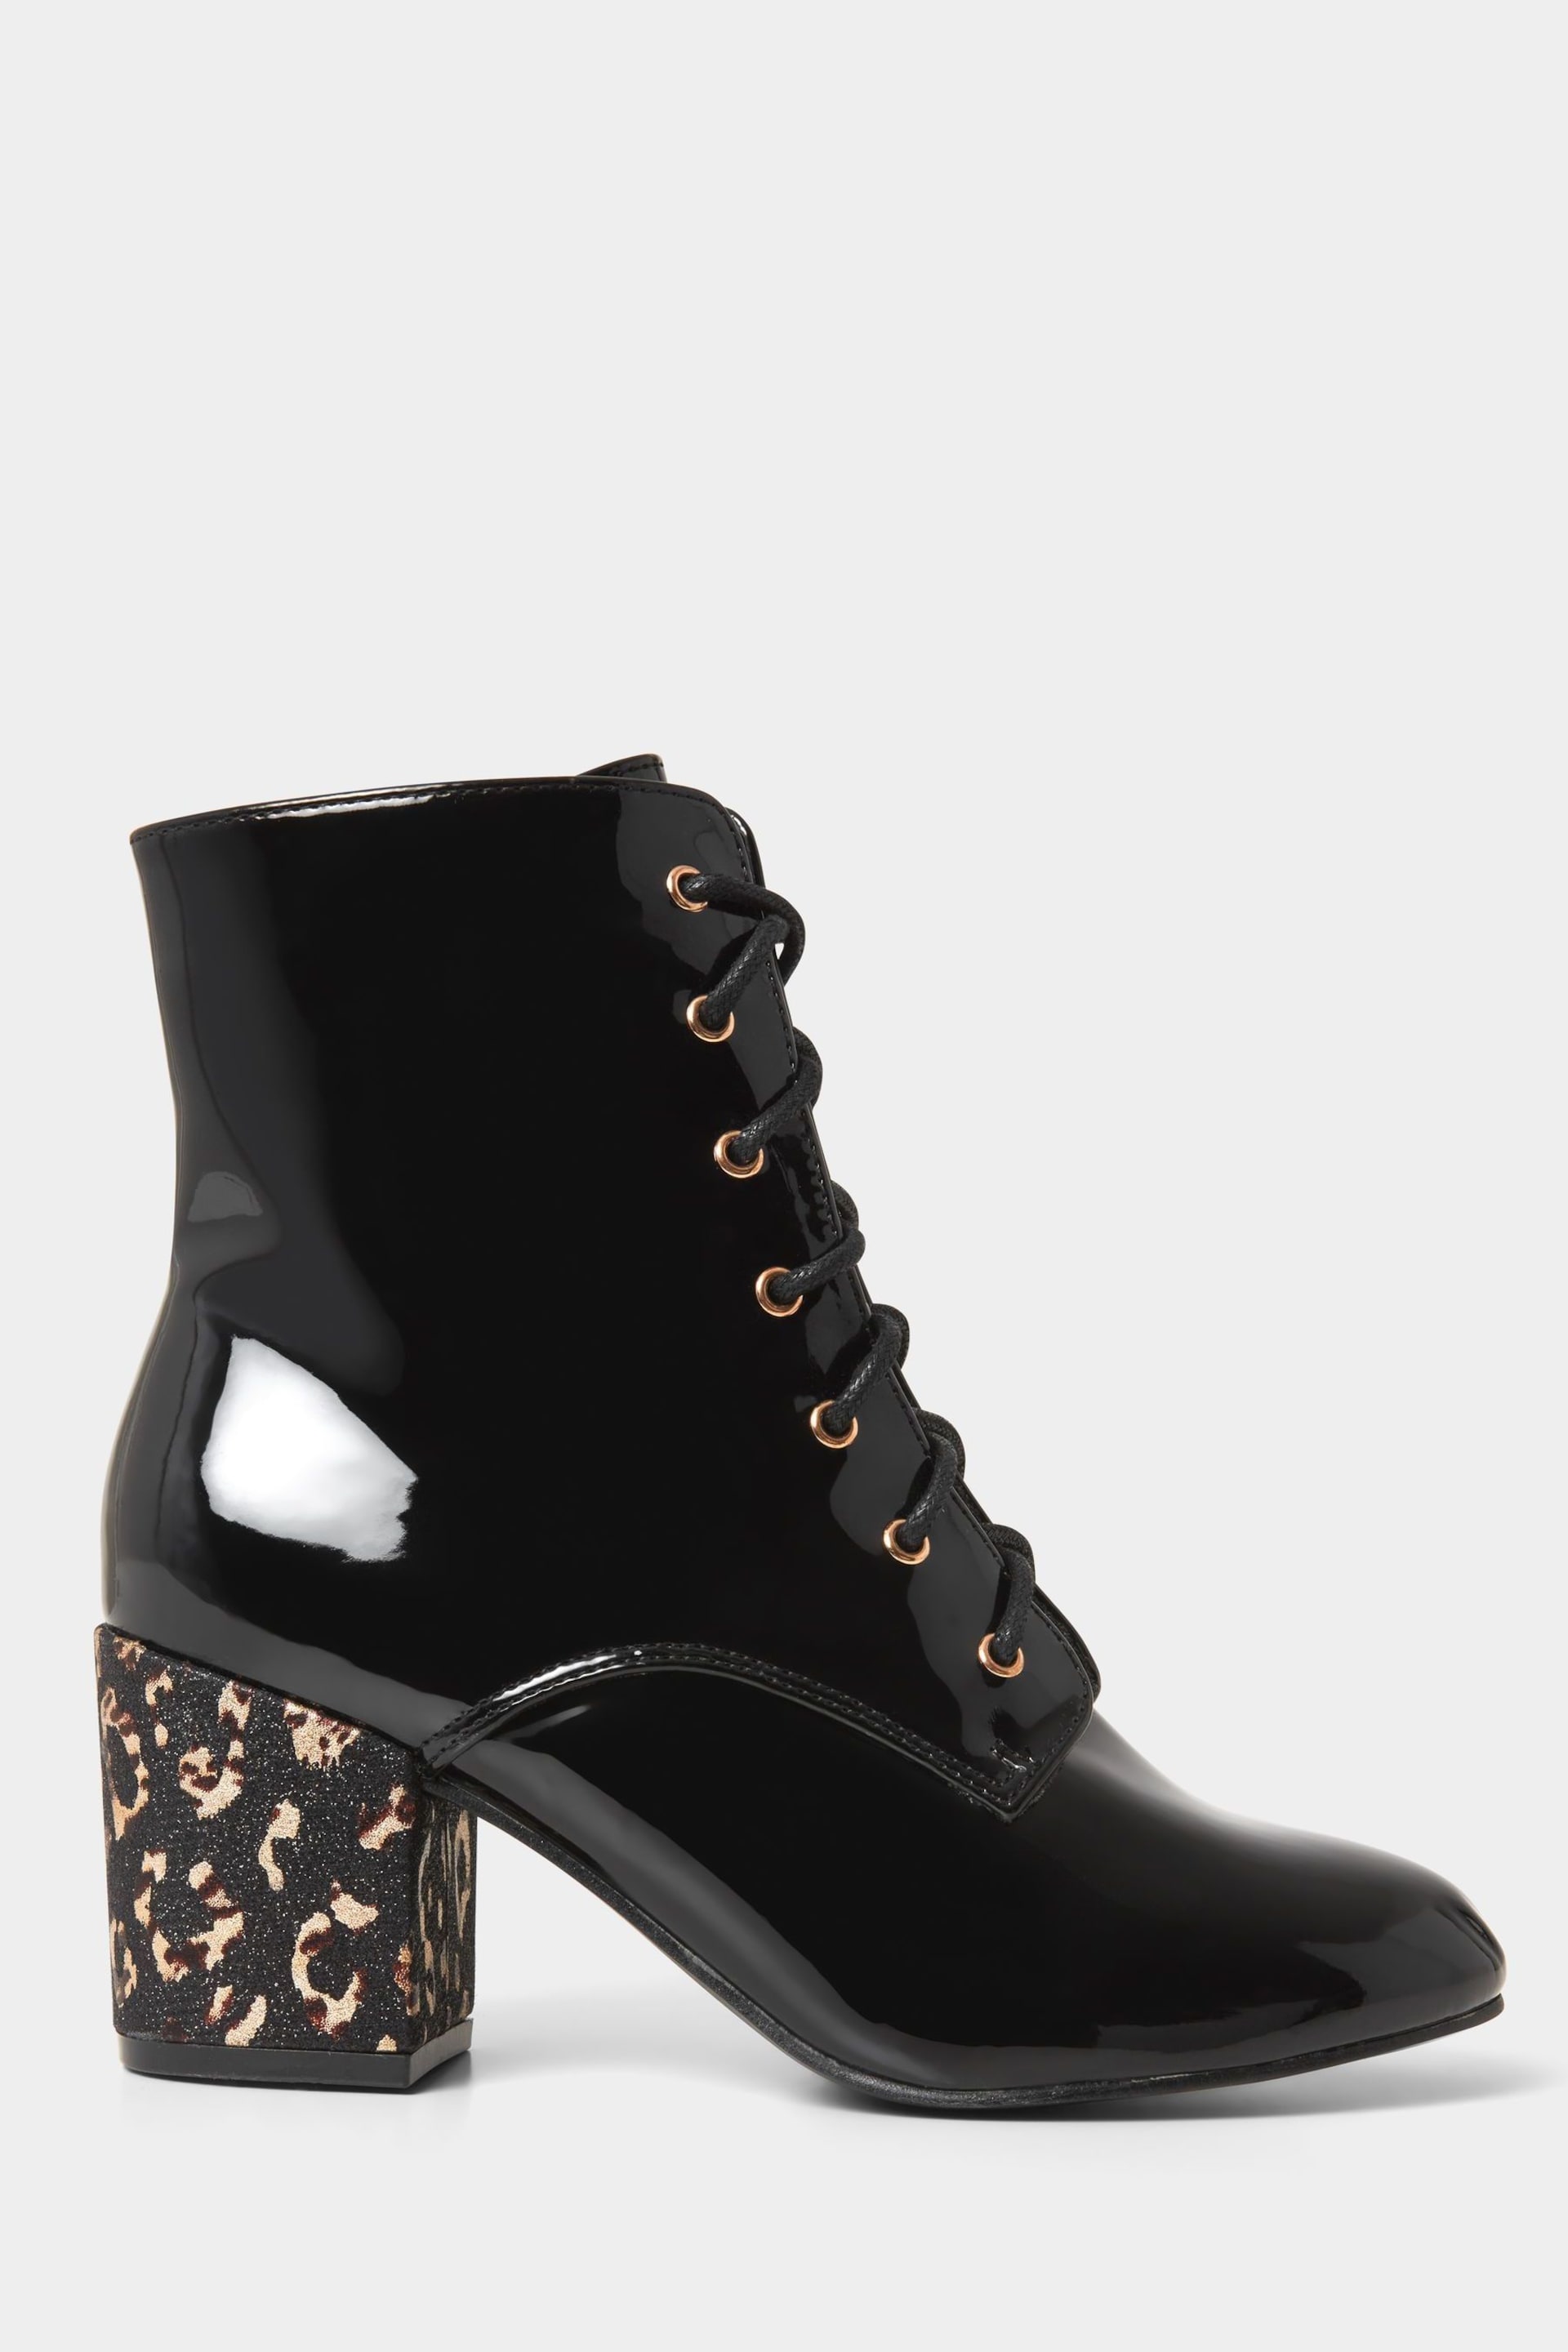 Joe Browns Black Wonderful Patent Ankle Boots - Image 1 of 5